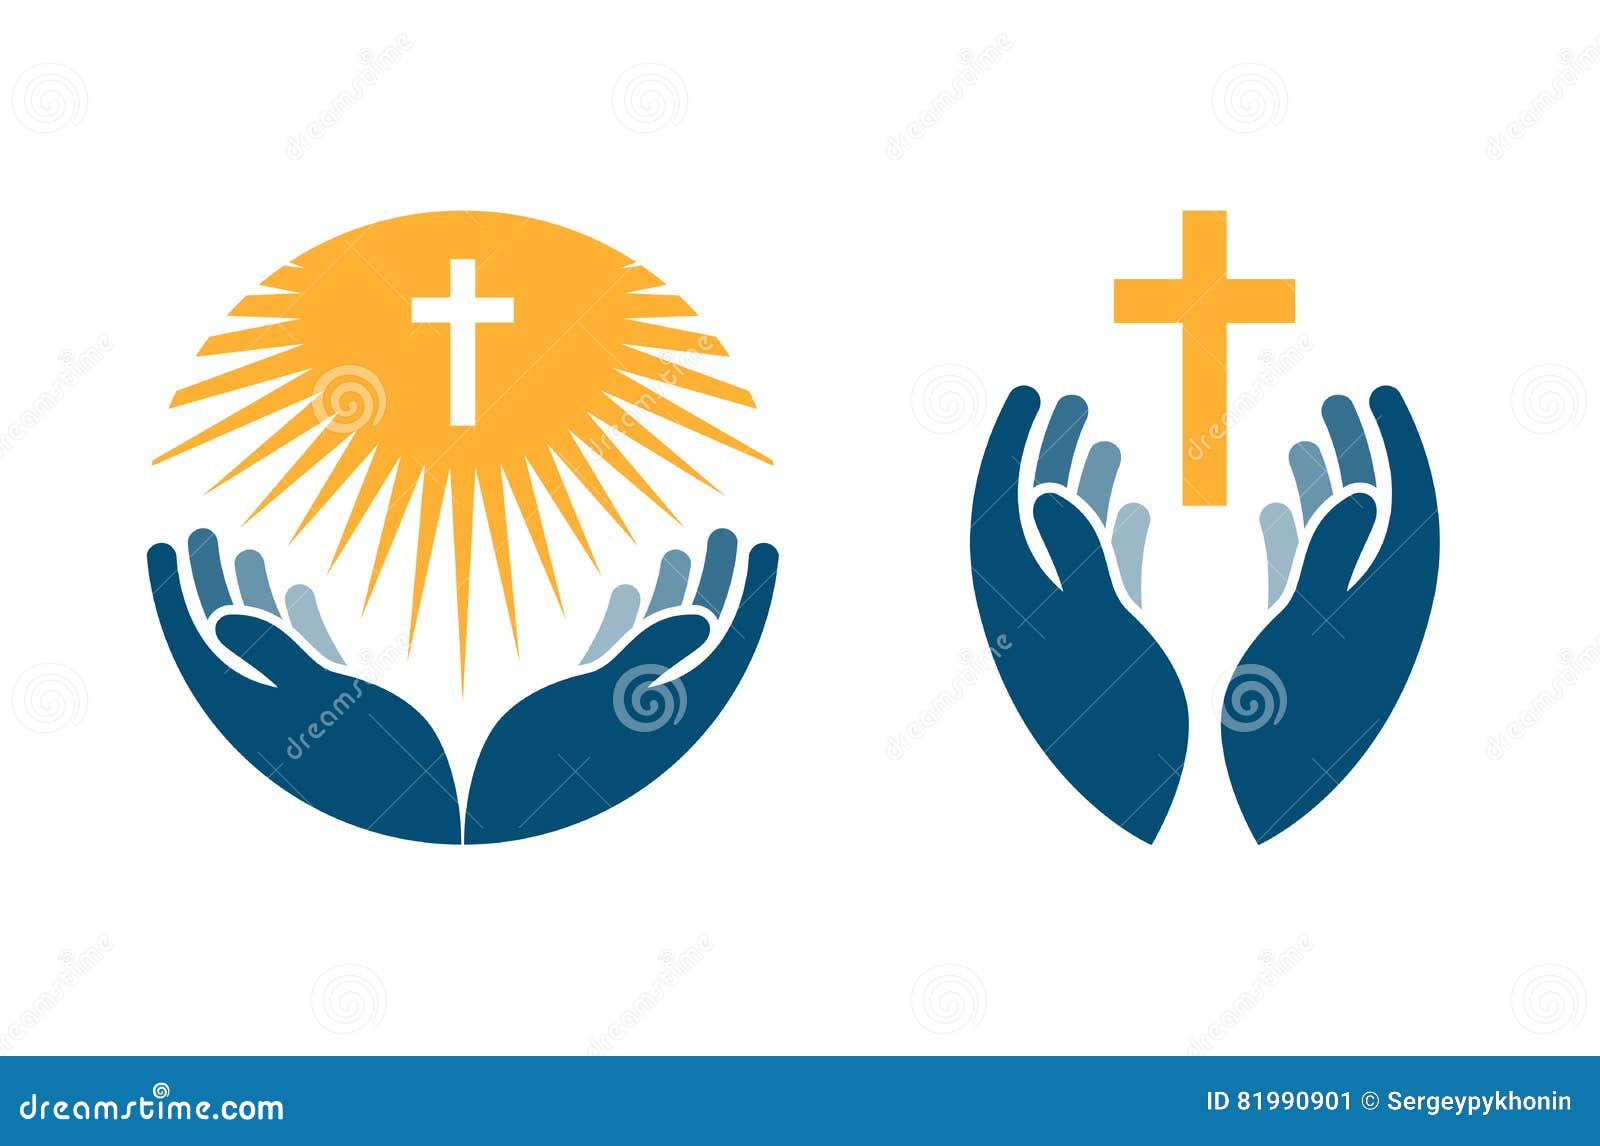 hands holding cross, icons or s. religion, church  logo